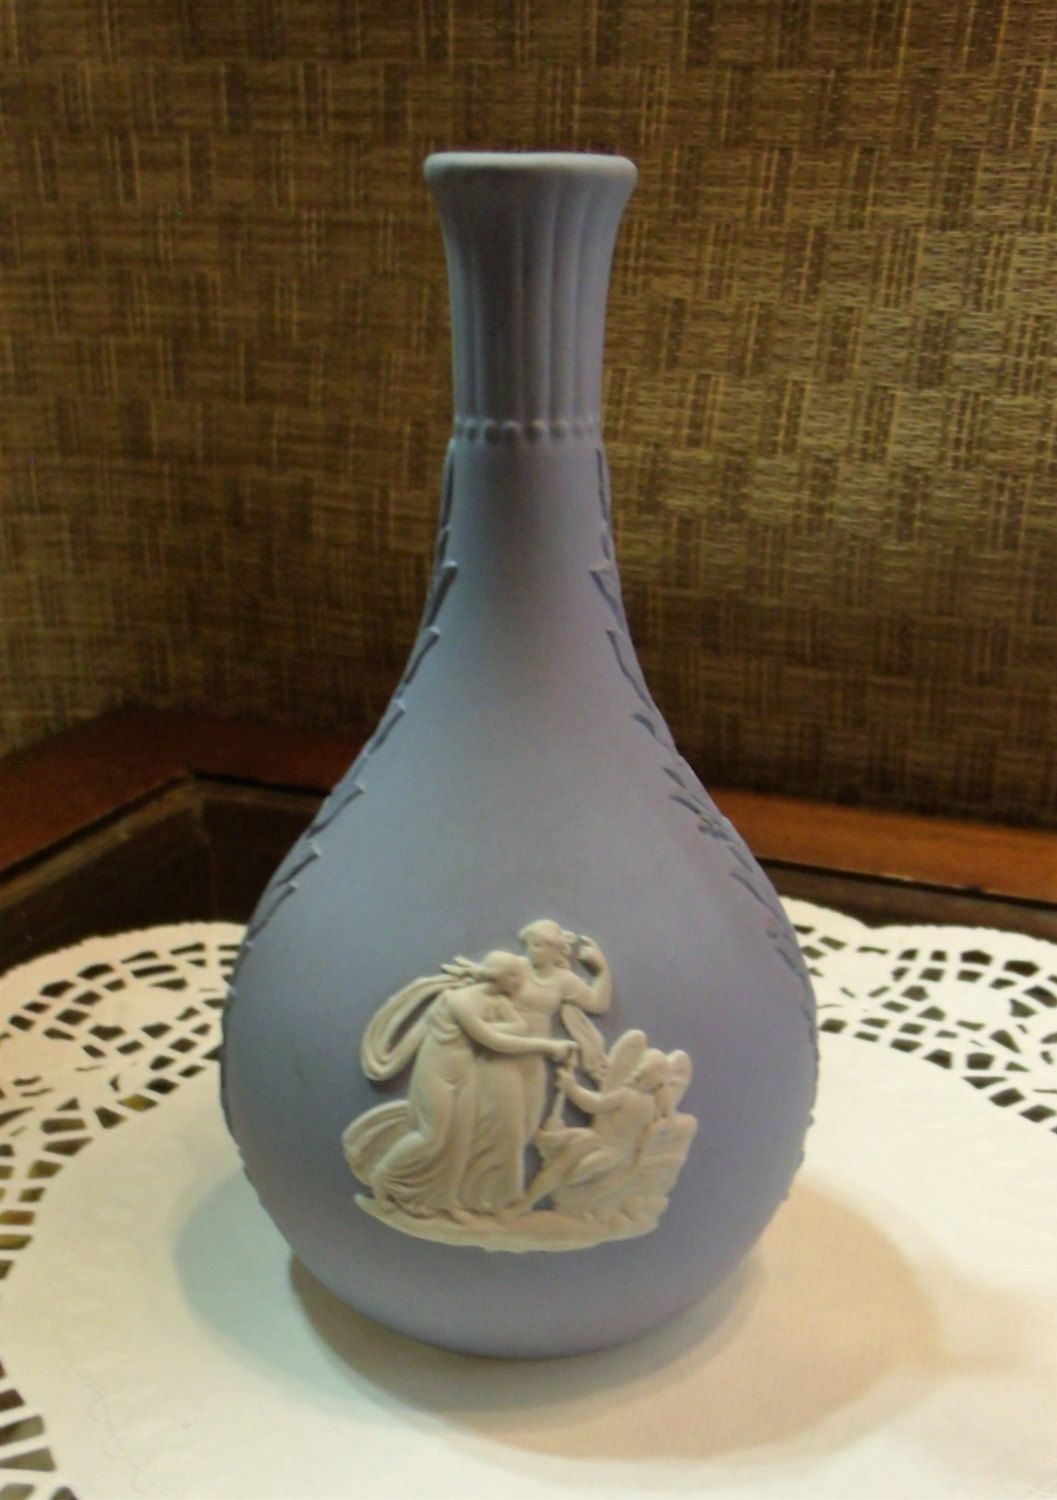 19 Fabulous Wedgwood Bud Vase 2022 free download wedgwood bud vase of blue bud vase wedgwood jasperware w pegasus white and blue small pertaining to blue bud vase wedgwood jasperware w pegasus white and blue small bud vase 5 1 2 with angel